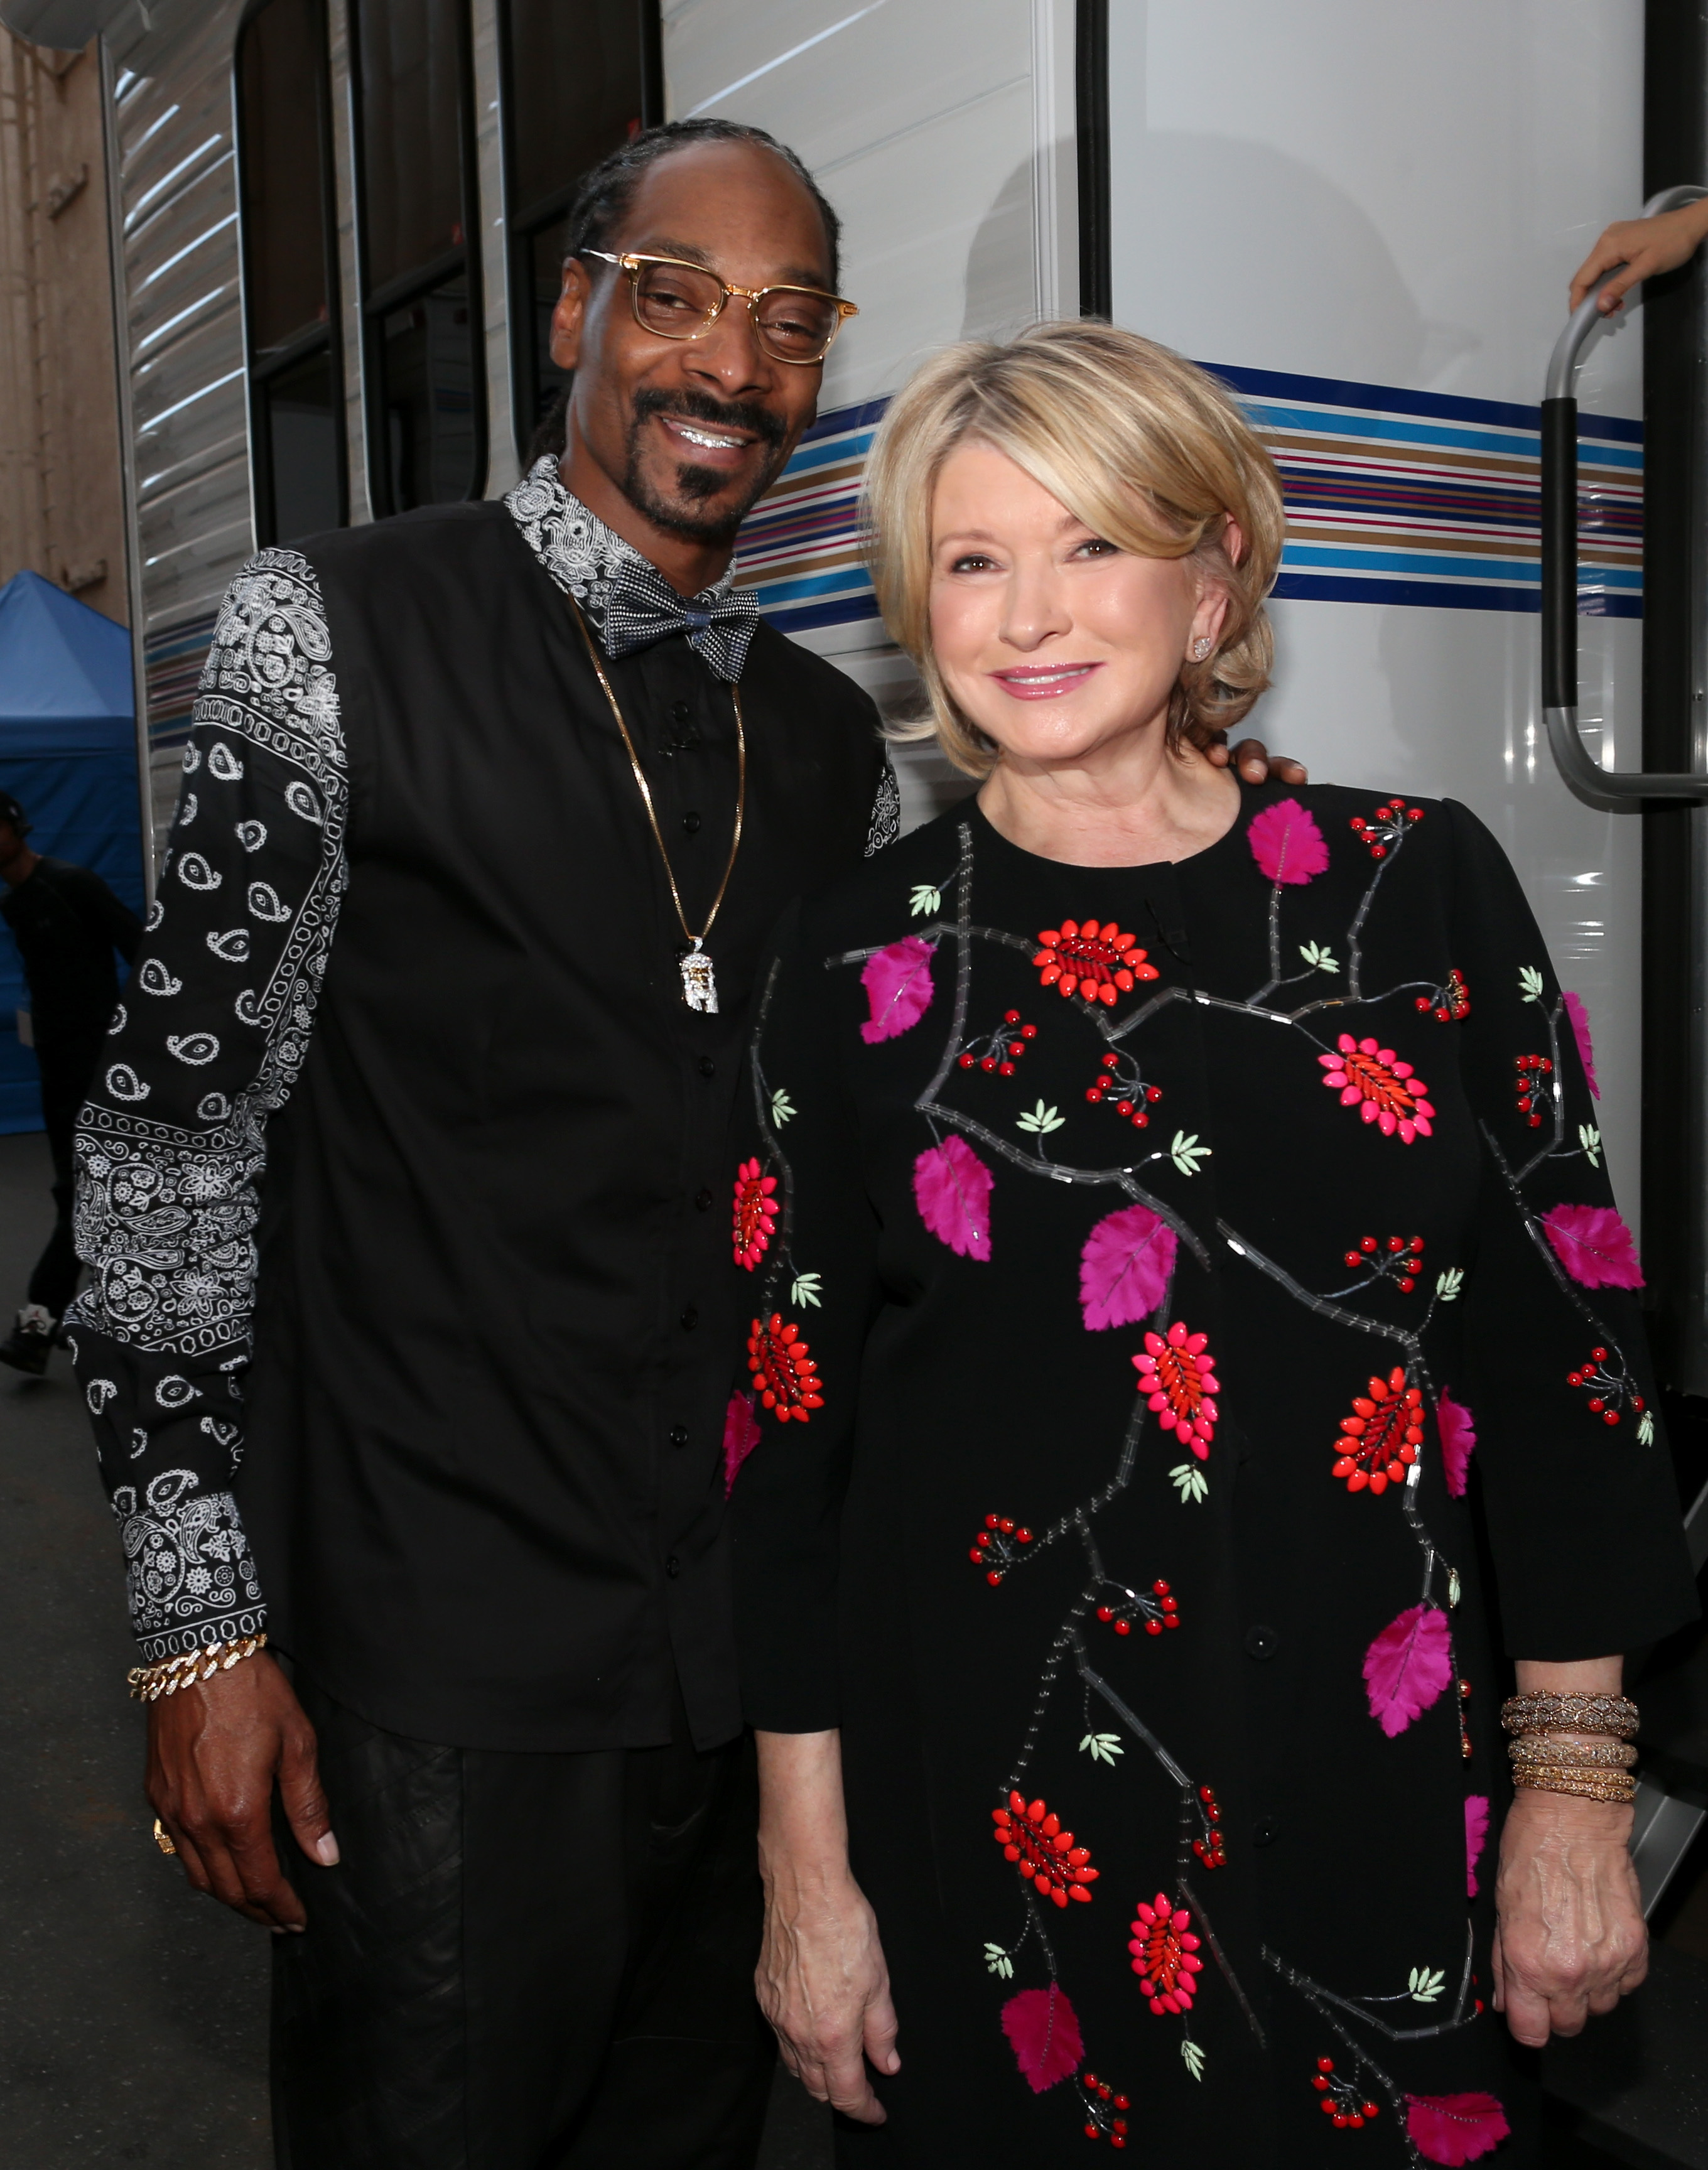 LOS ANGELES, CA - MARCH 14:  Rapper Snoop Dogg and TV personality Martha Stewart attend The Comedy Central Roast of Justin Bieber at Sony Pictures Studios on March 14, 2015 in Los Angeles, California.  (Photo by Christopher Polk/Getty Images) (Christopher Polk-Getty Images)